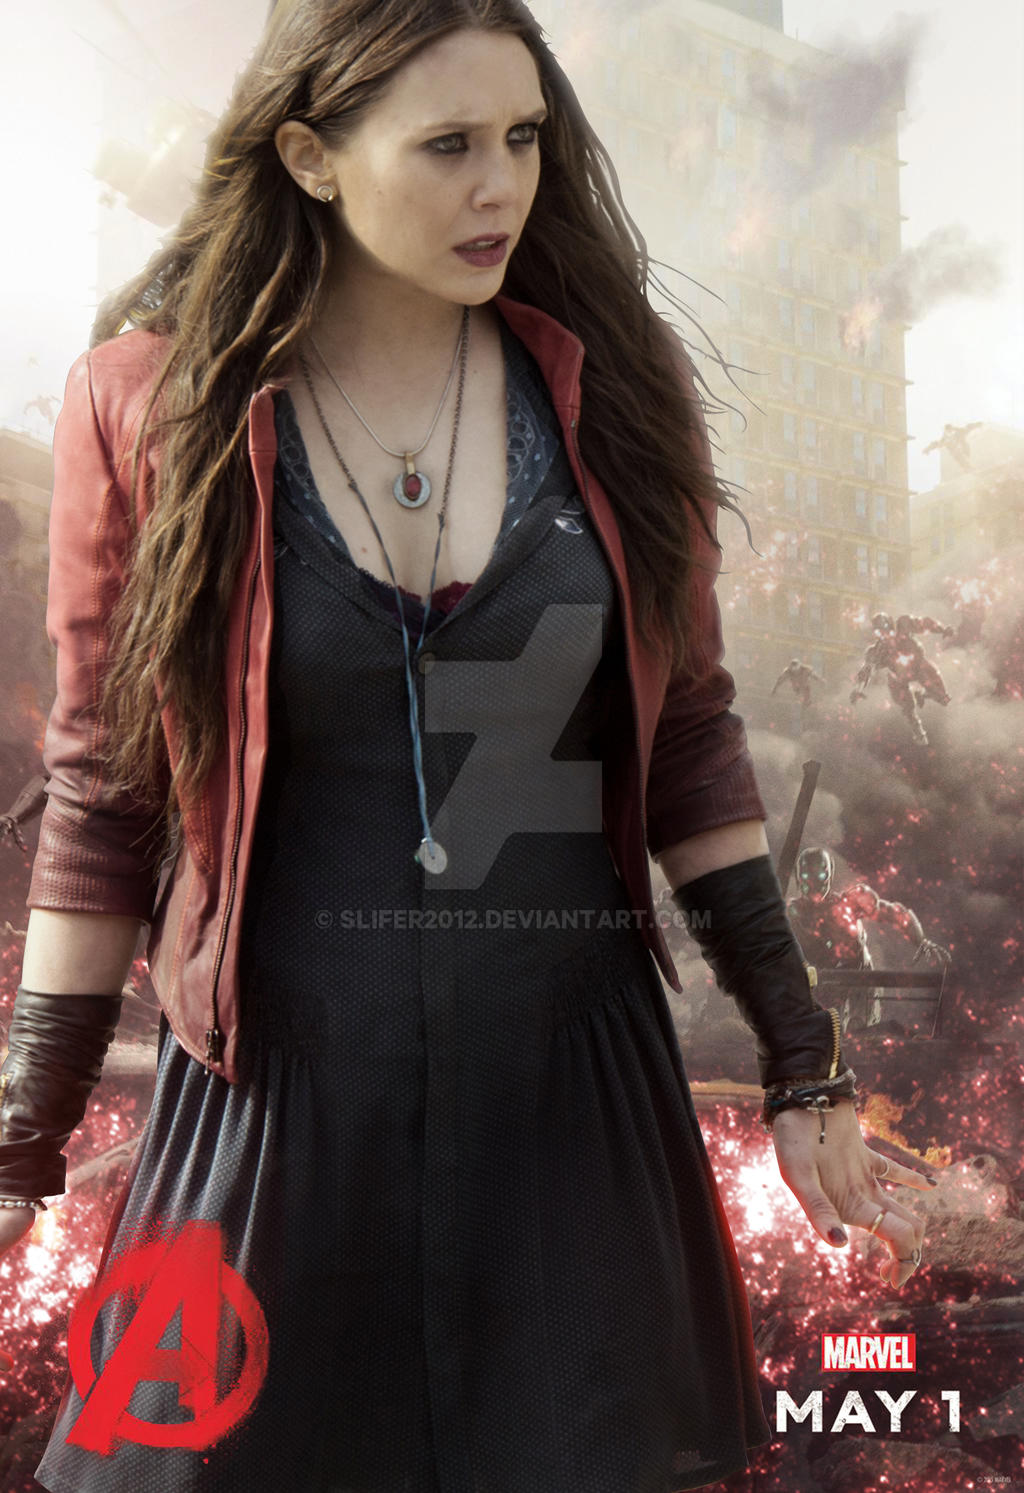 scarlet-witch-avengers-age-of-ultron-by-slifer2012-on-deviantart